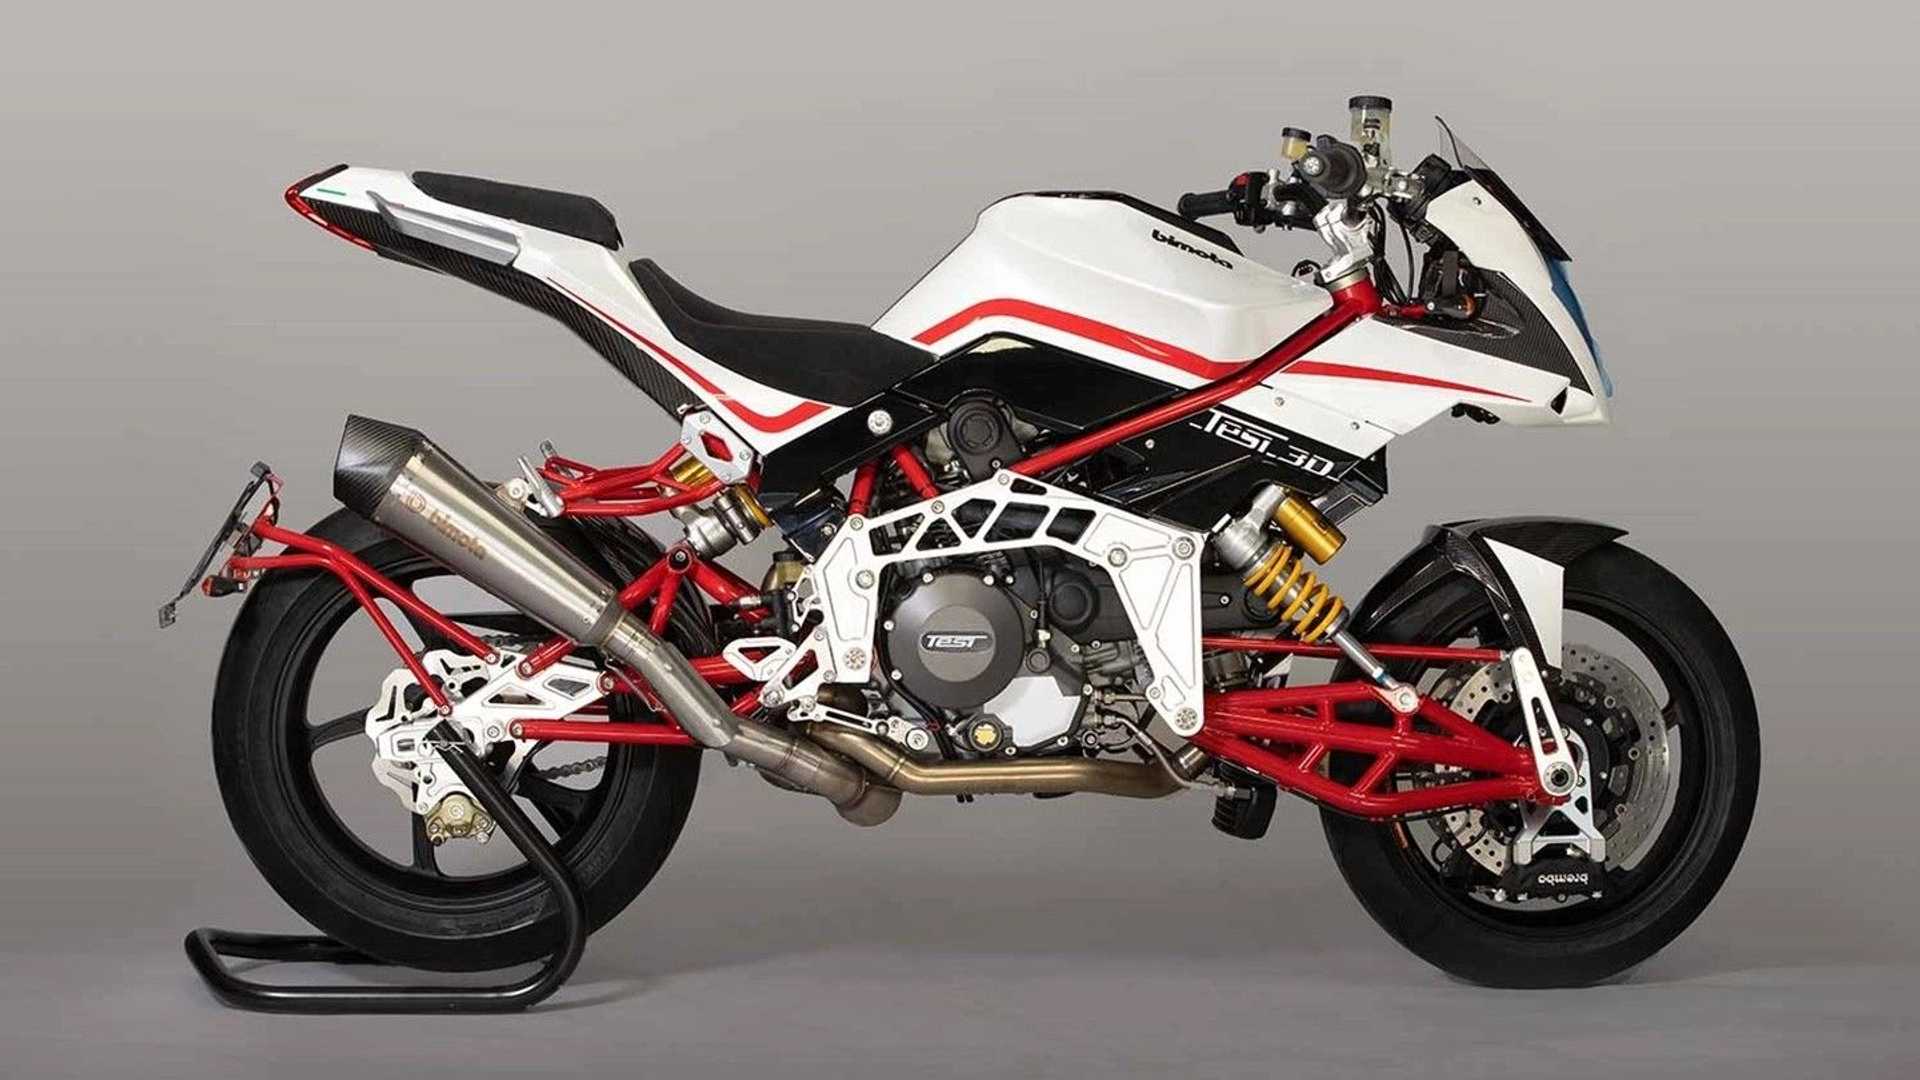 Three limited edition Bimota Tesi 3D for sale in England.
- also in the MOTORCYCLES.NEWS APP